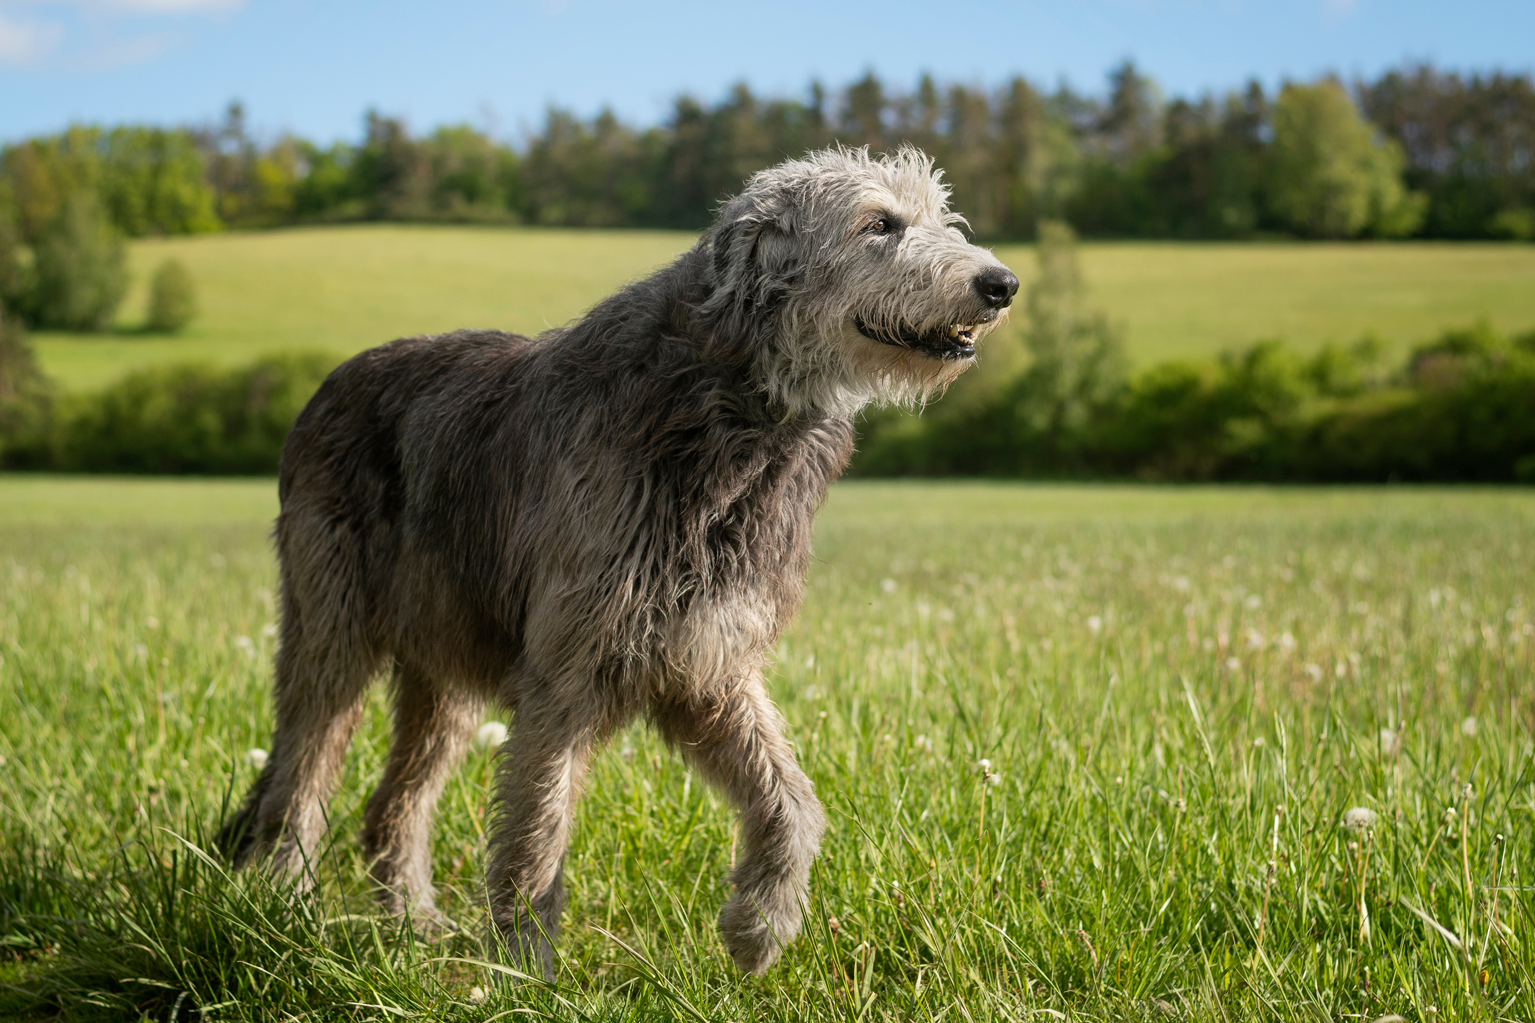 The majestic Irish Wolfhound without the collar walks peacefully across the meadow